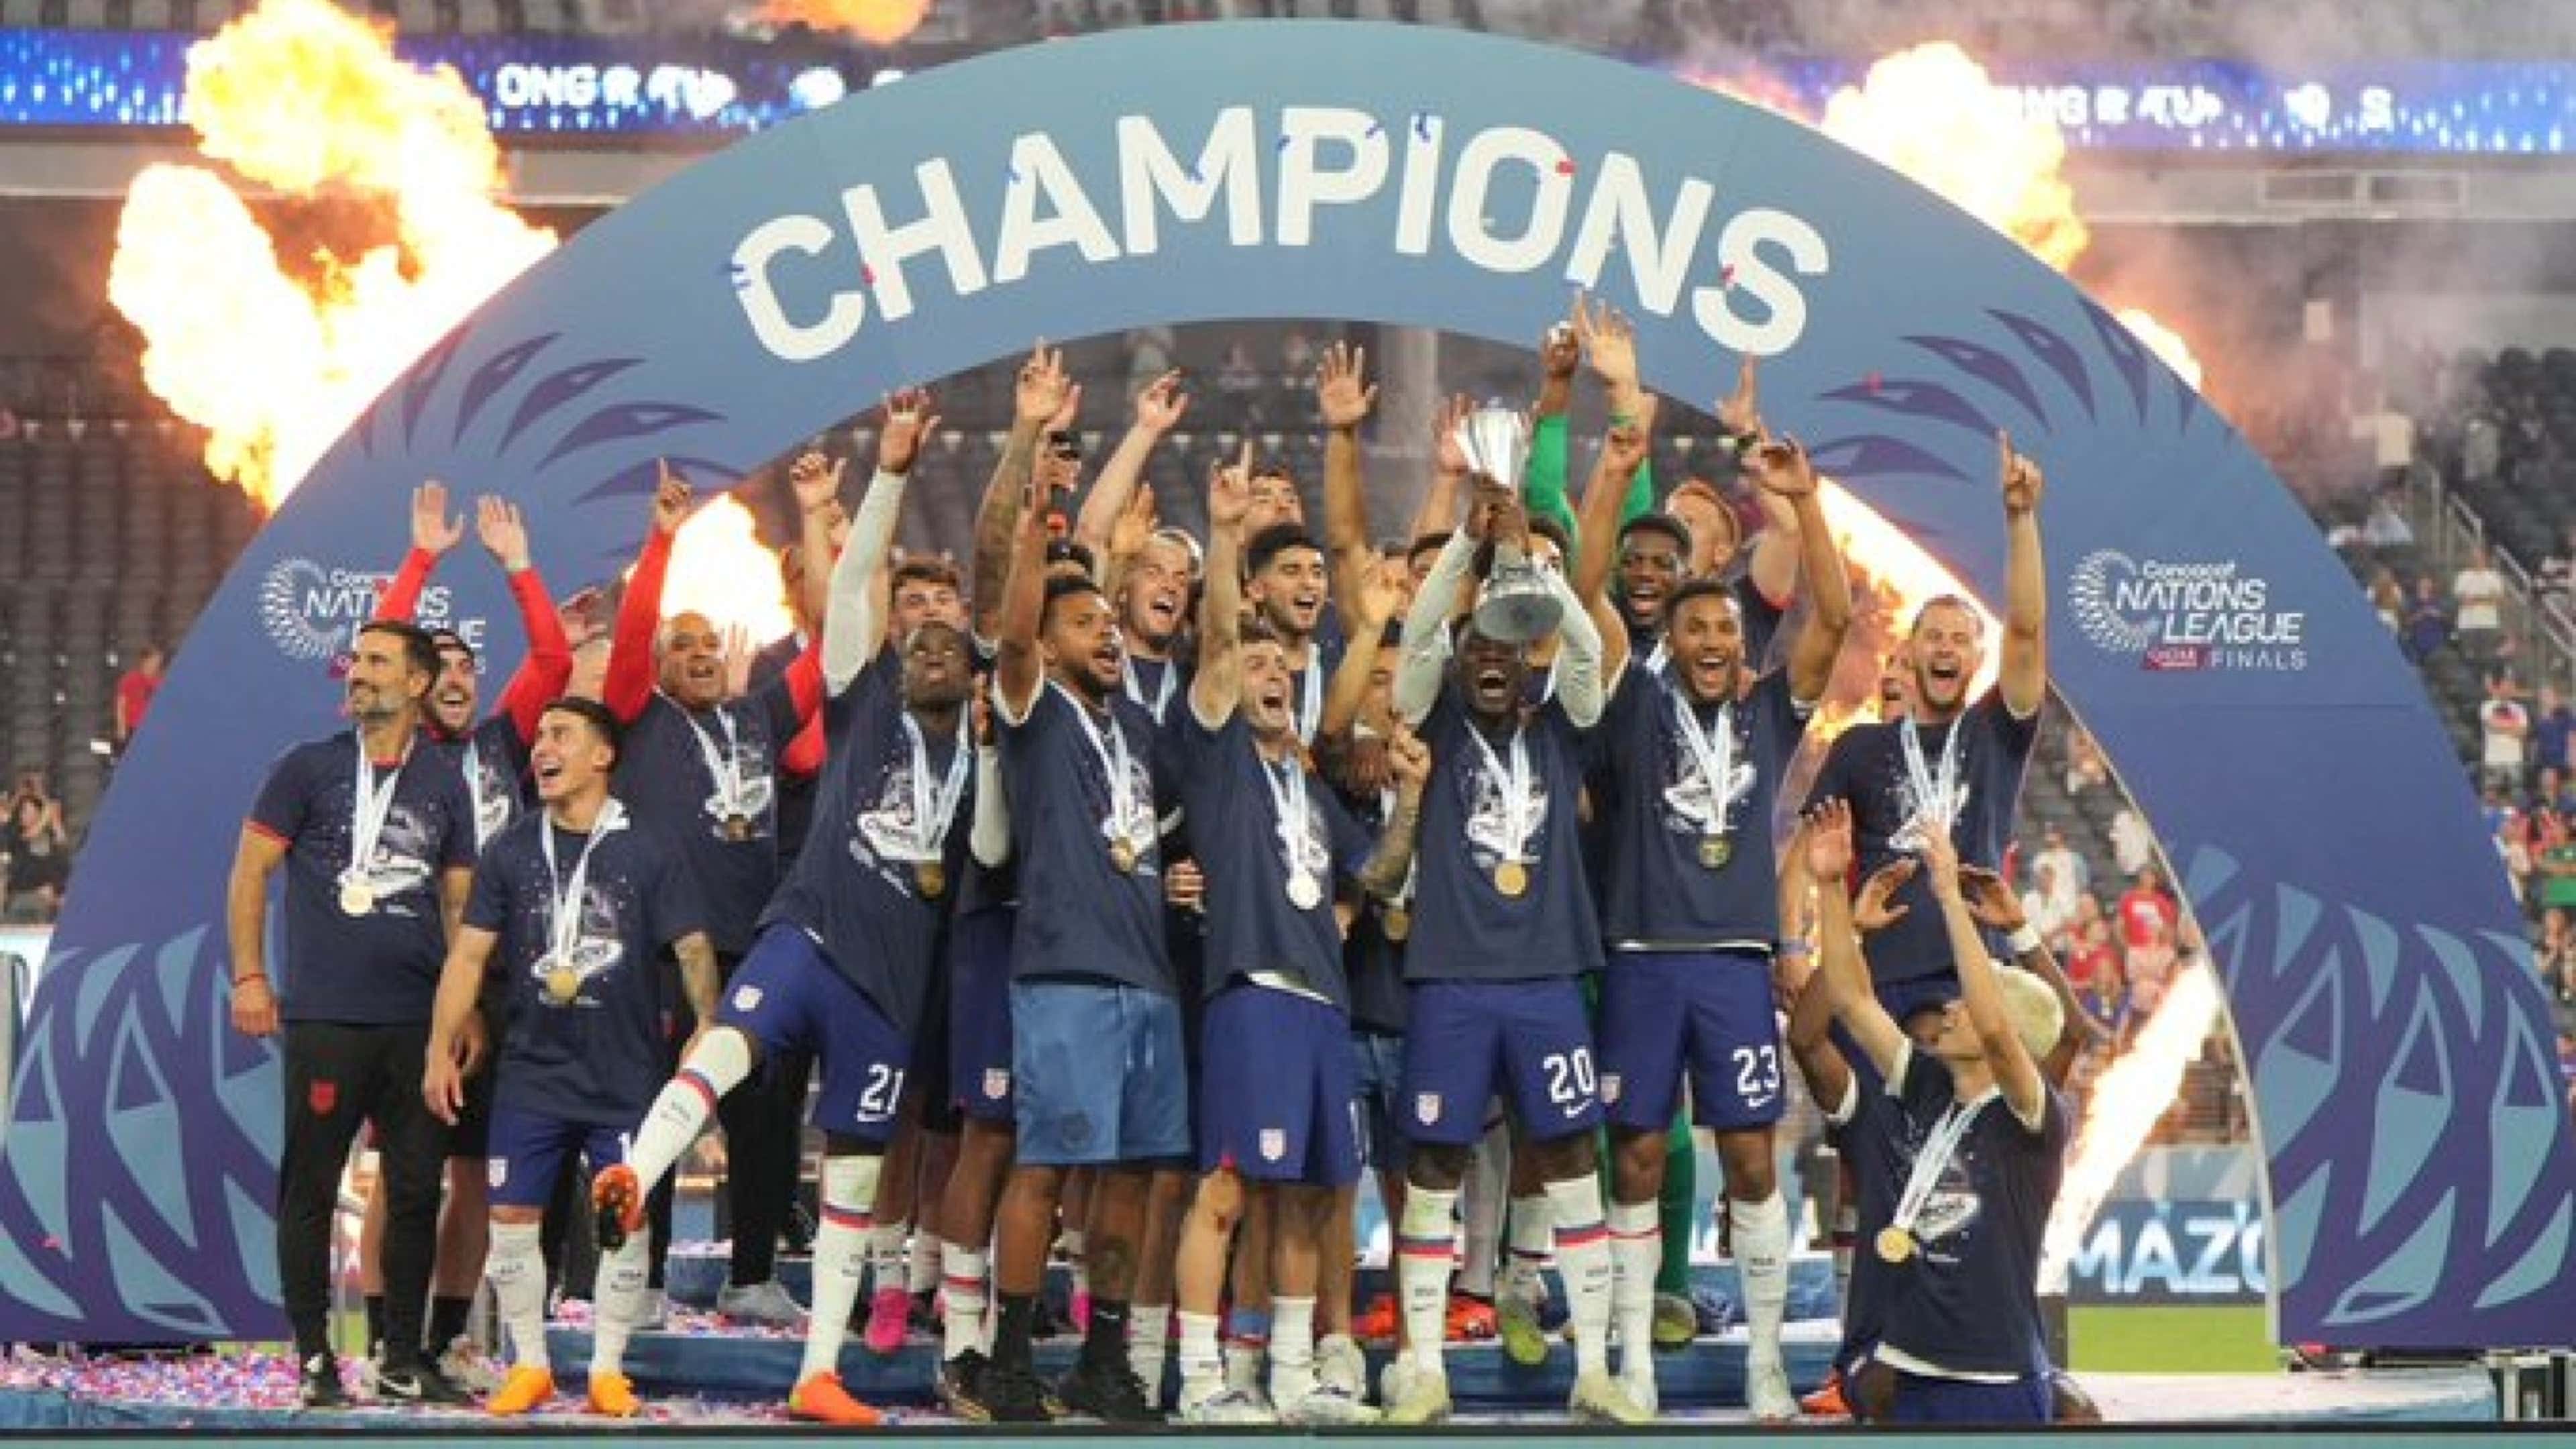 How to watch CONCACAF Champions League soccer: Dates, schedule, TV and live  streaming options